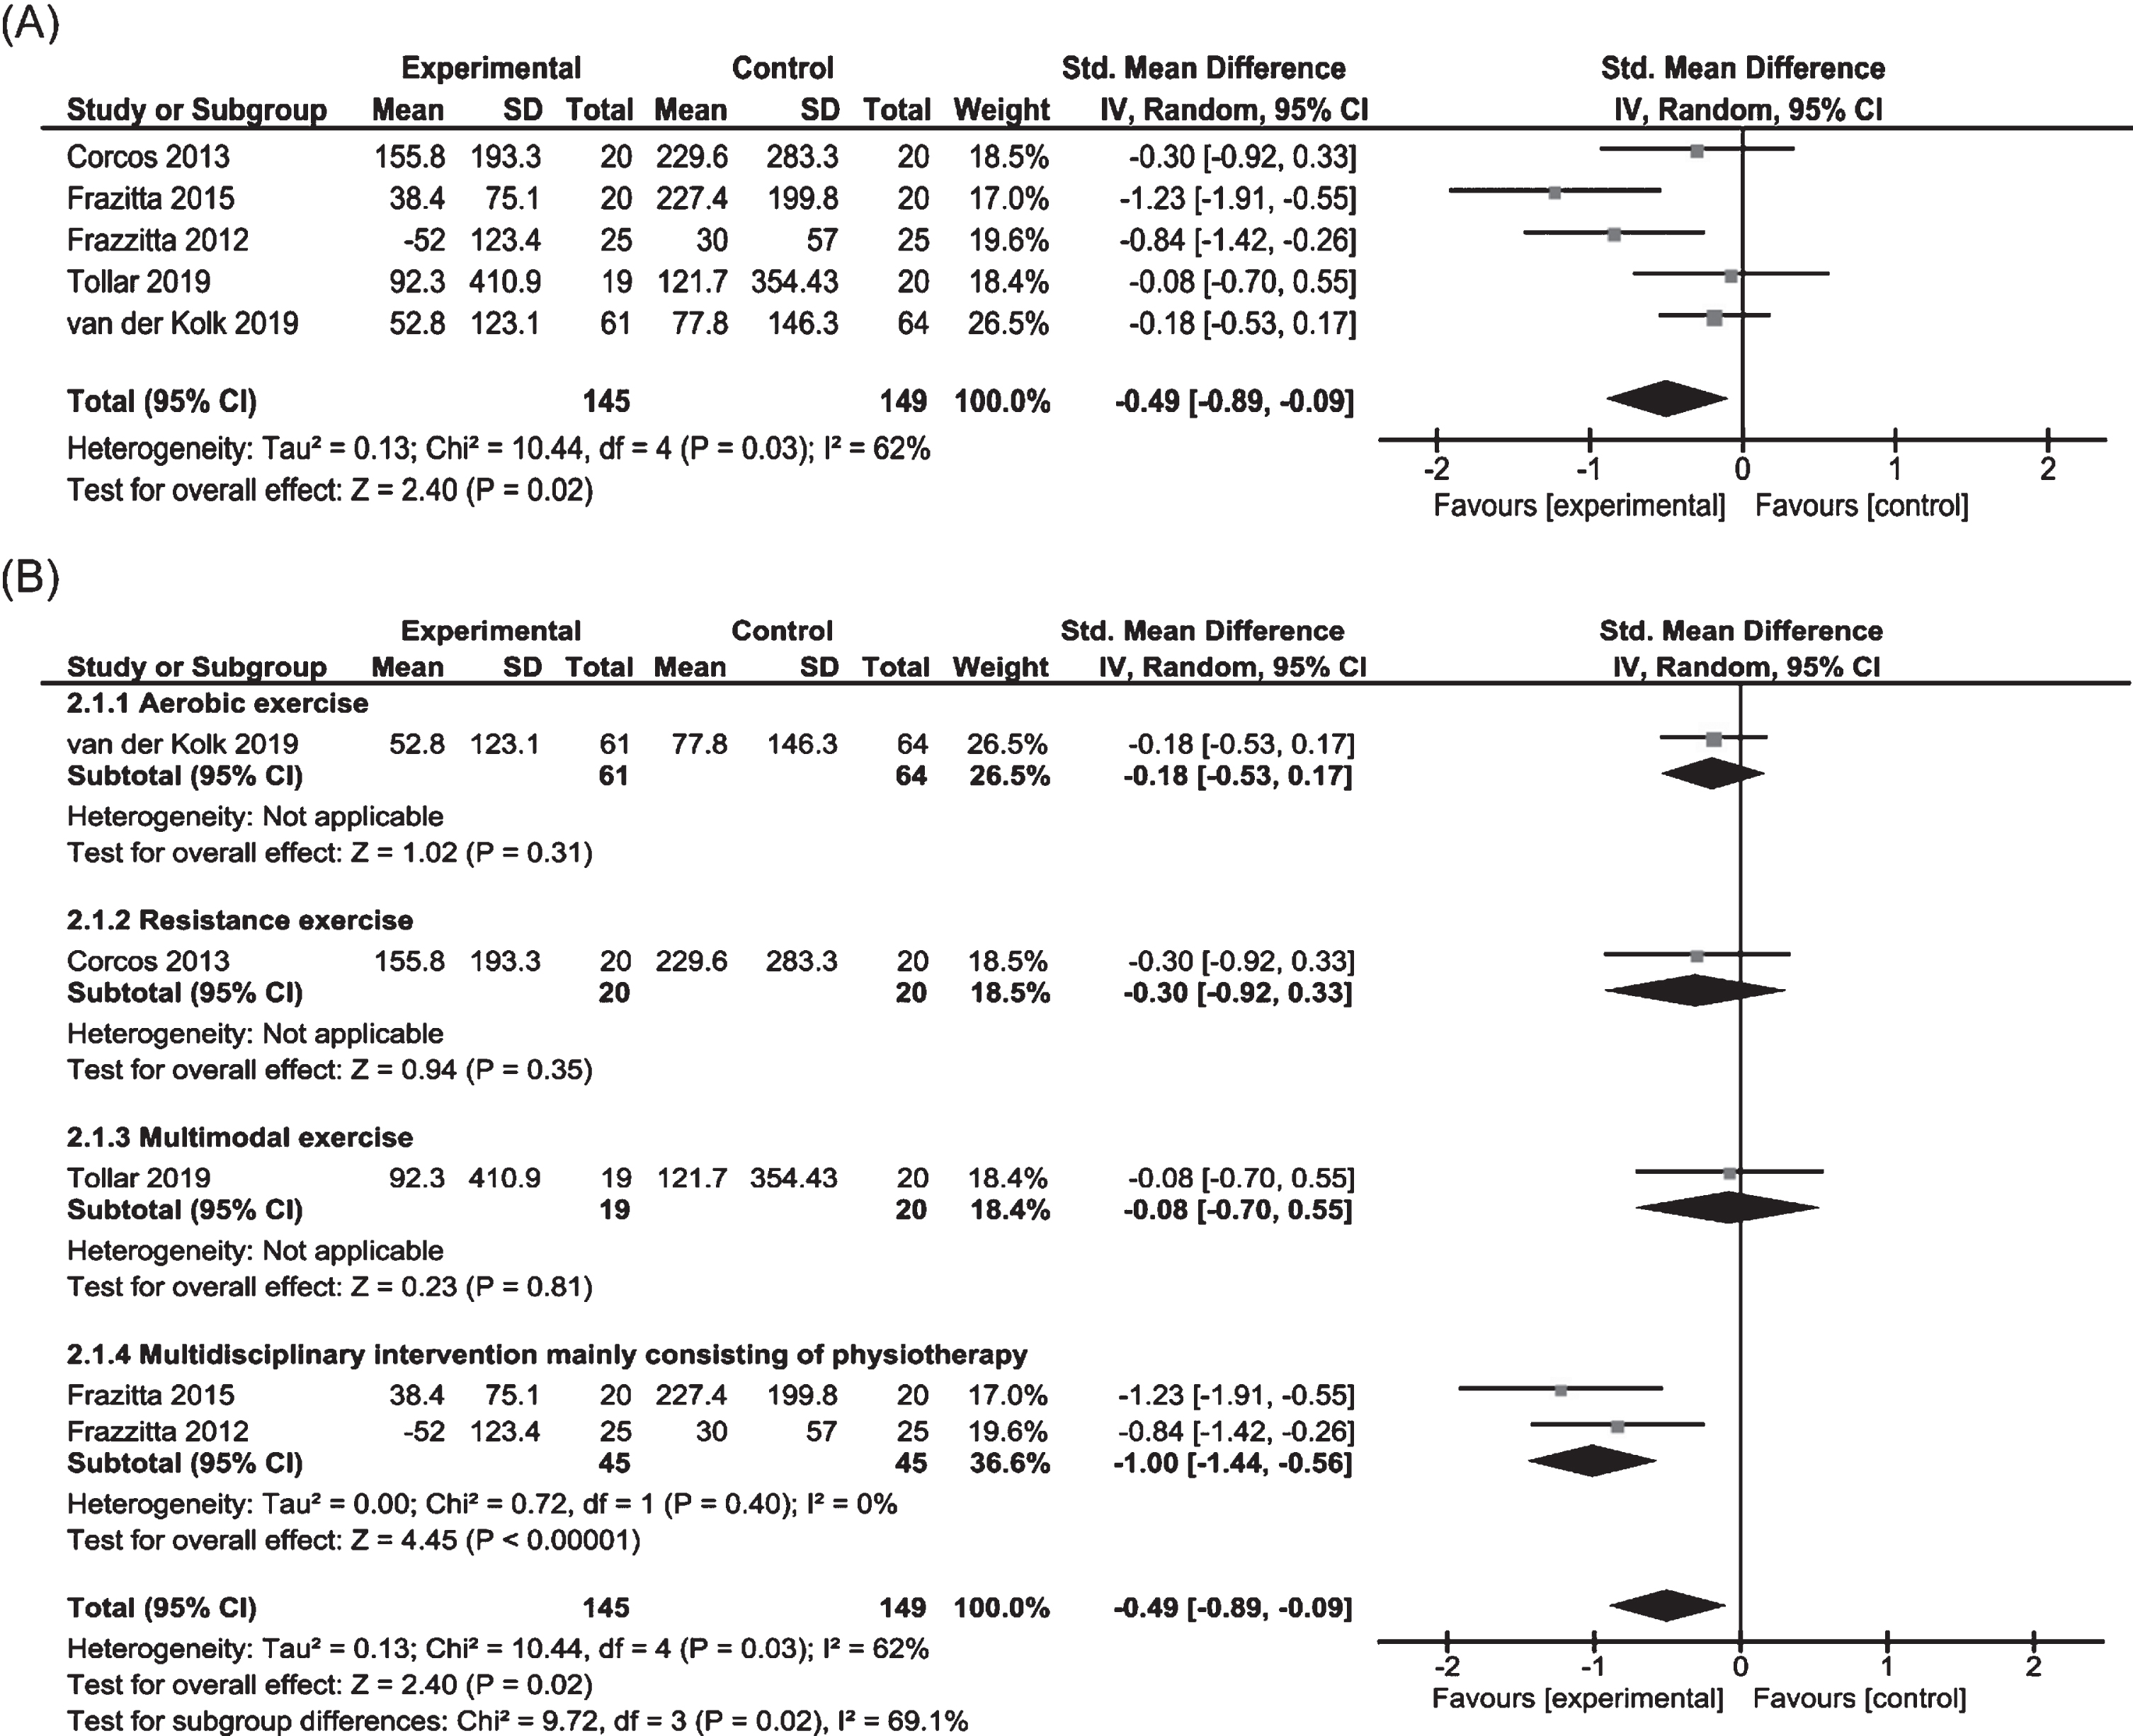 Forest plots of Levodopa equivalent dose for physiotherapy versus no/control intervention. (A) Overall effect of physiotherapy interventions. (B) Subgroup analysis (category of intervention).